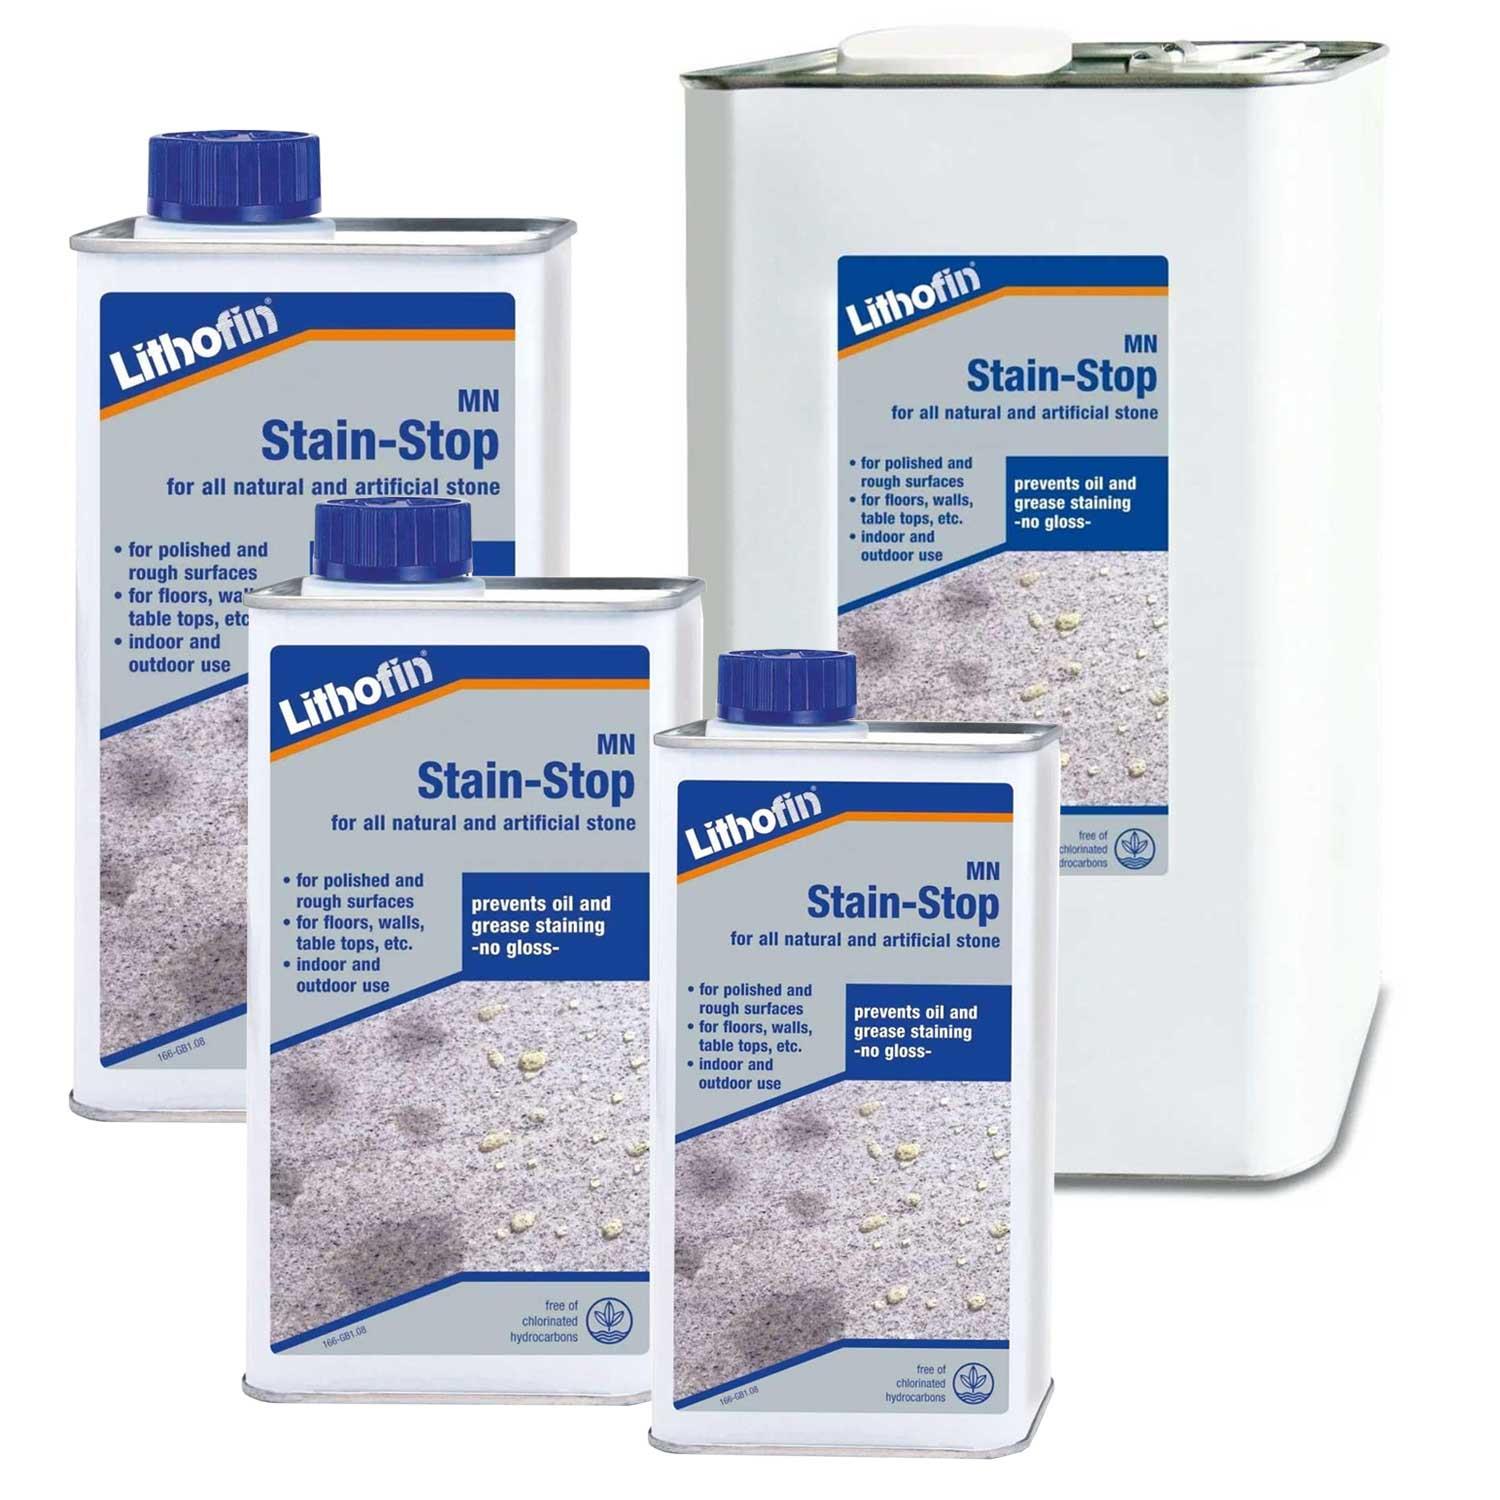 Lithofin MN Stain-Stop Natural Artificial Stone Prevent Oil Grease